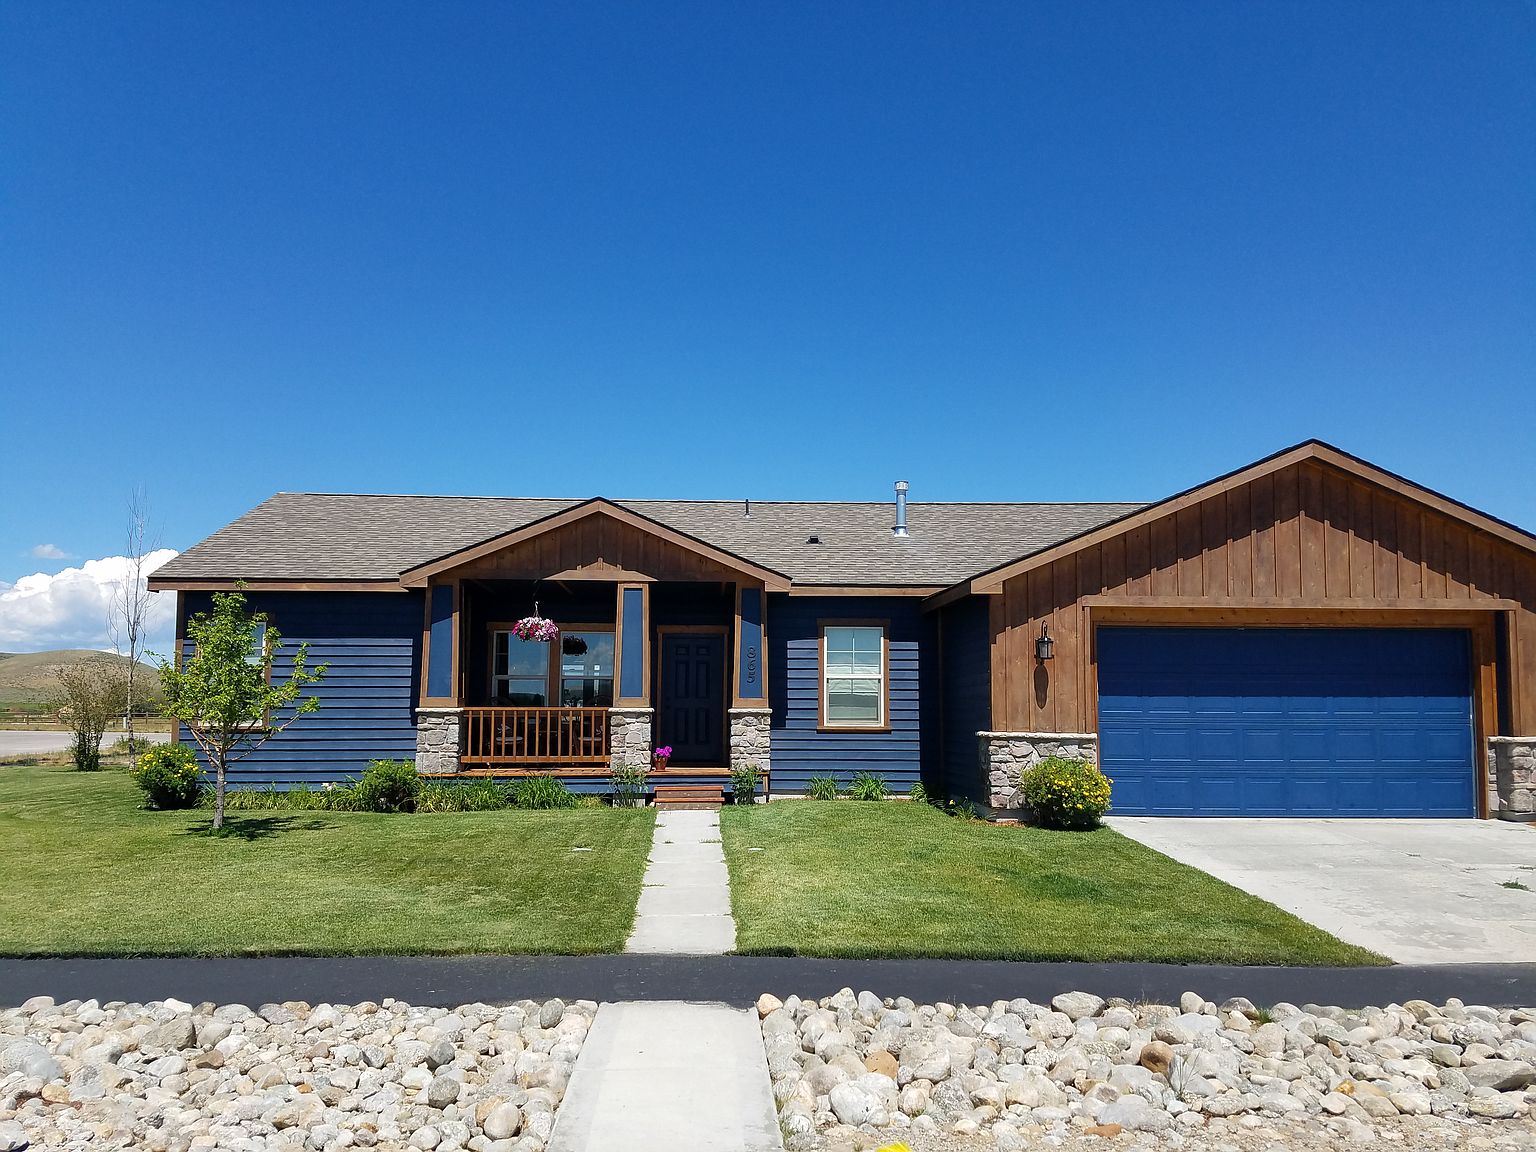 865 Driftwood St Pinedale Wy 82941 Zillow